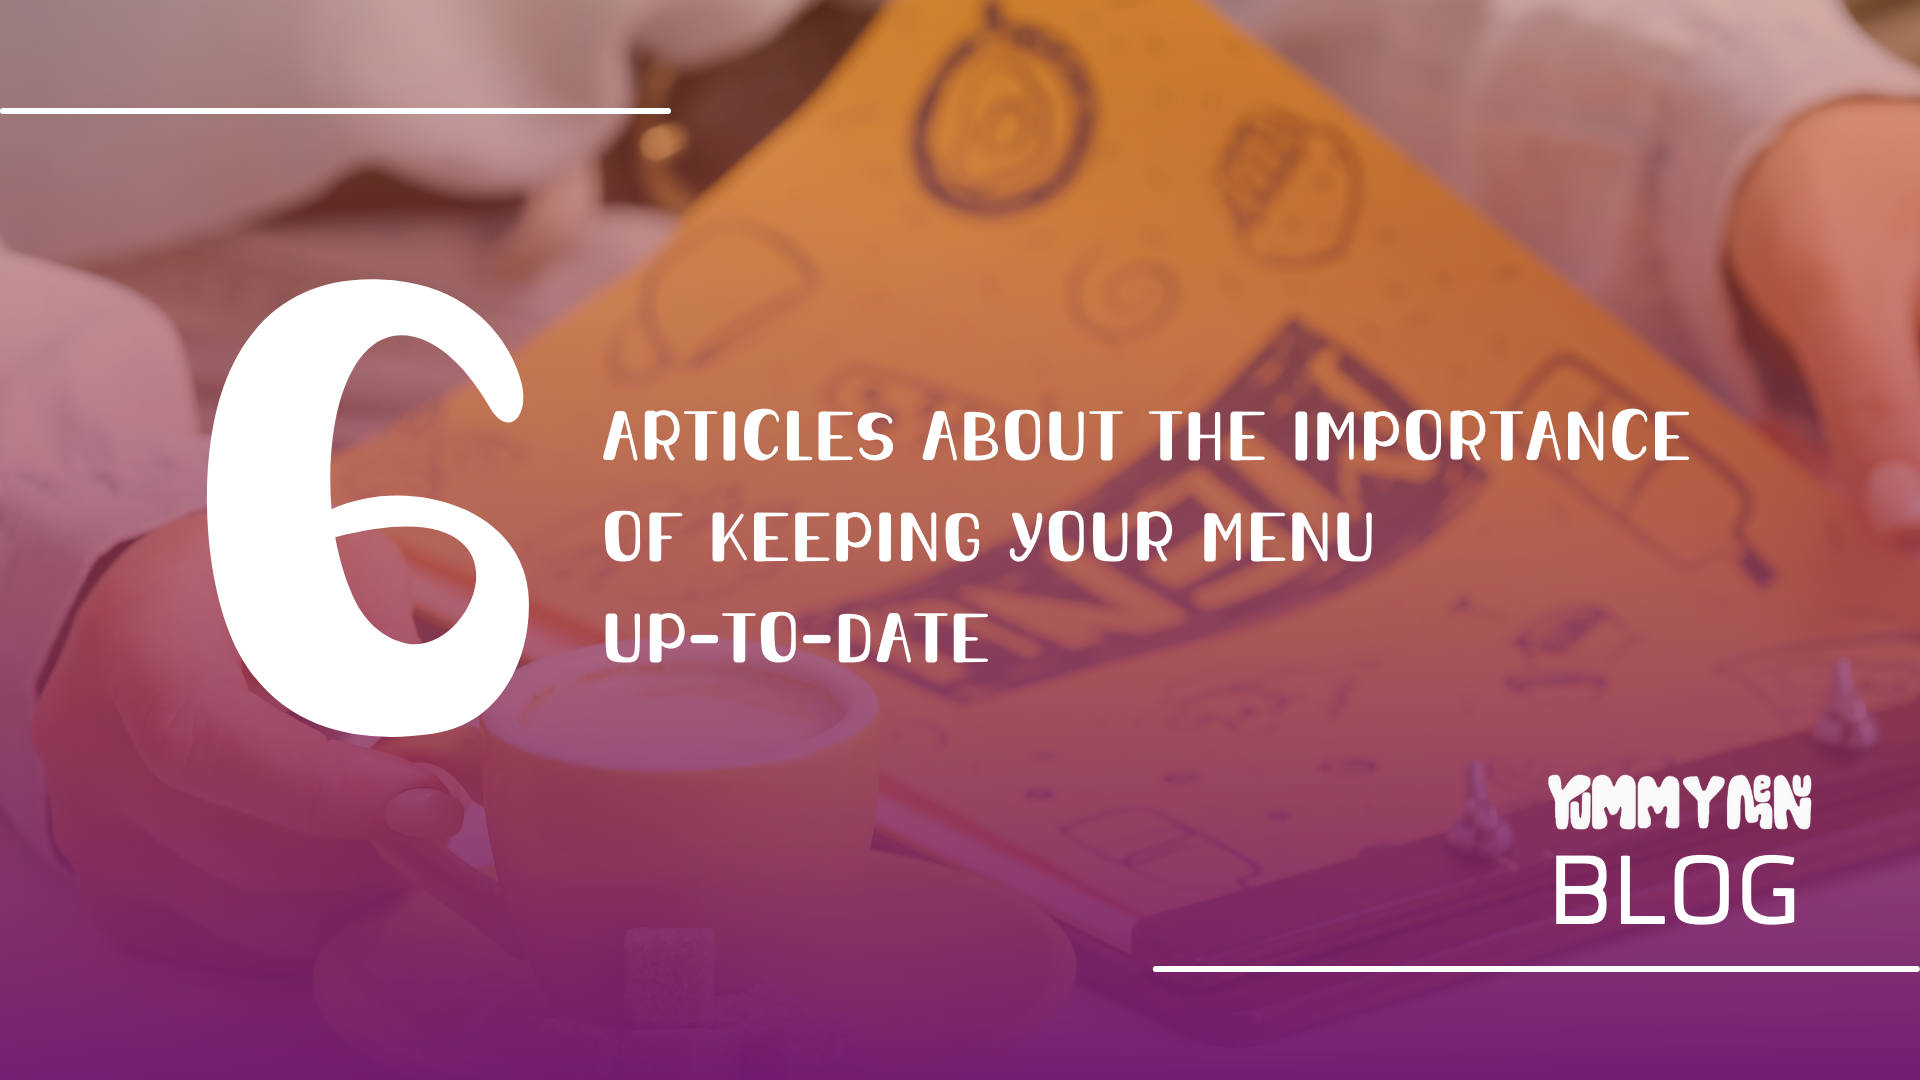 6 Articles About the Importance of Keeping Your Menu Up-to-Date